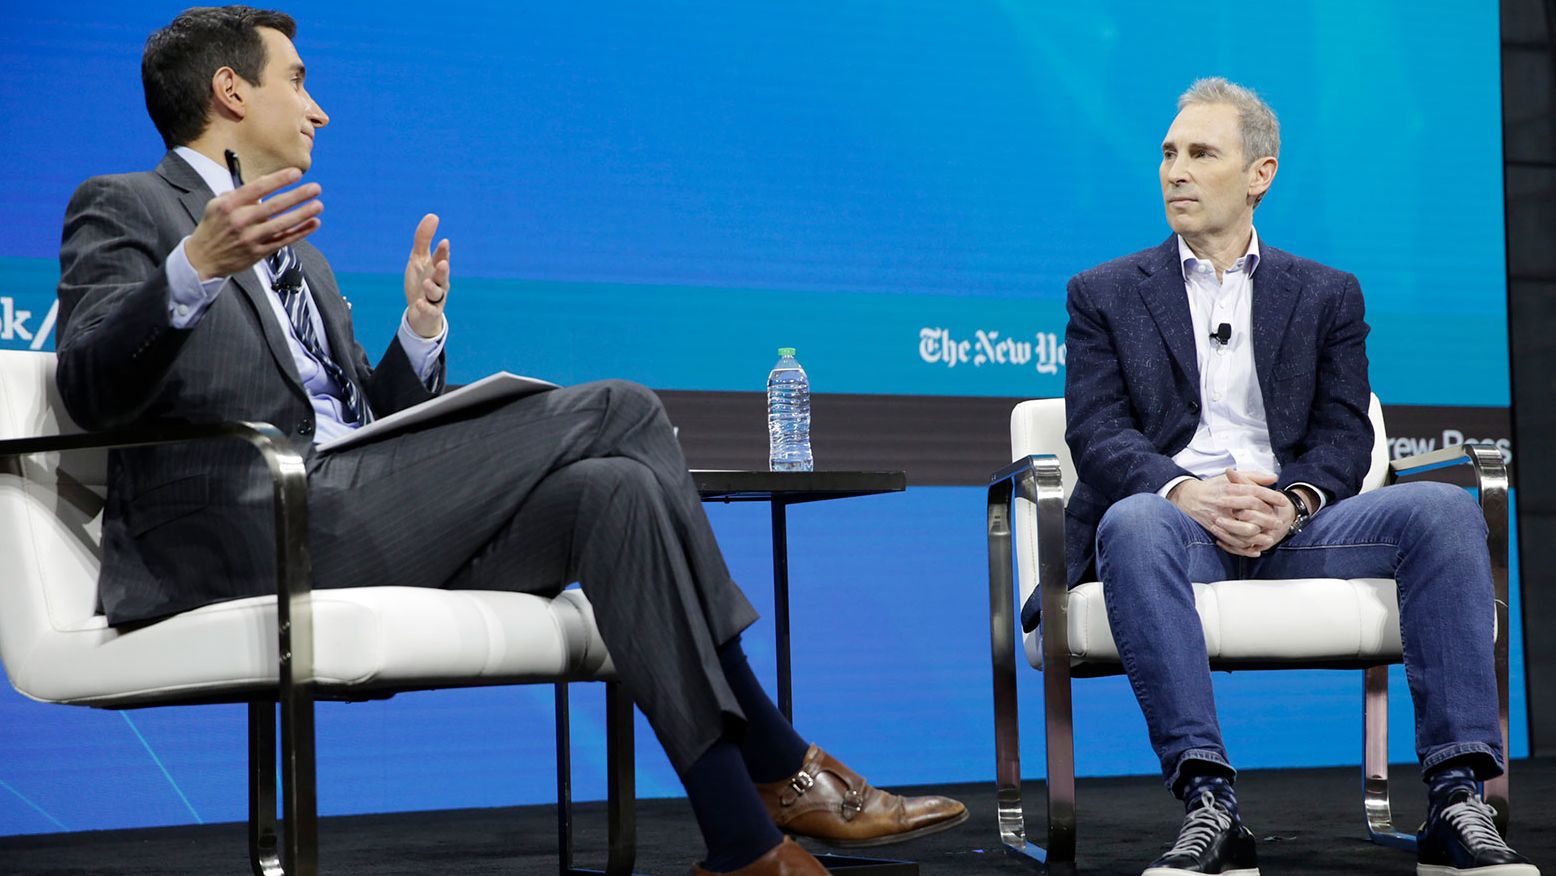 Andrew Ross Sorkin, a New York Times columnist, and Andy Jassy, the chief executive of Amazon, talk on stage at the DealBook summit on November 30, 2022 in New York.